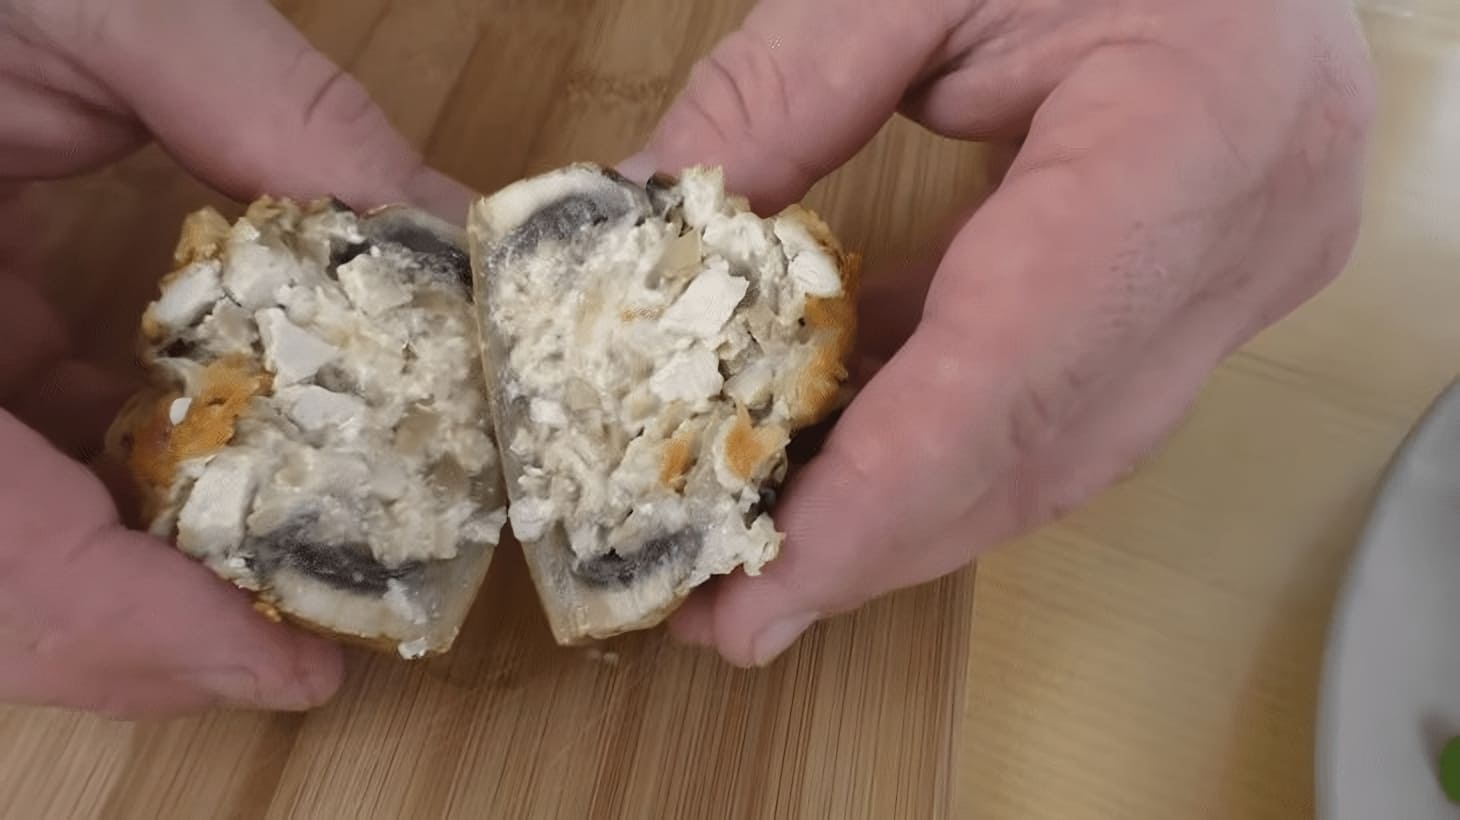 Stuffed Mushrooms with Chicken and Cheese